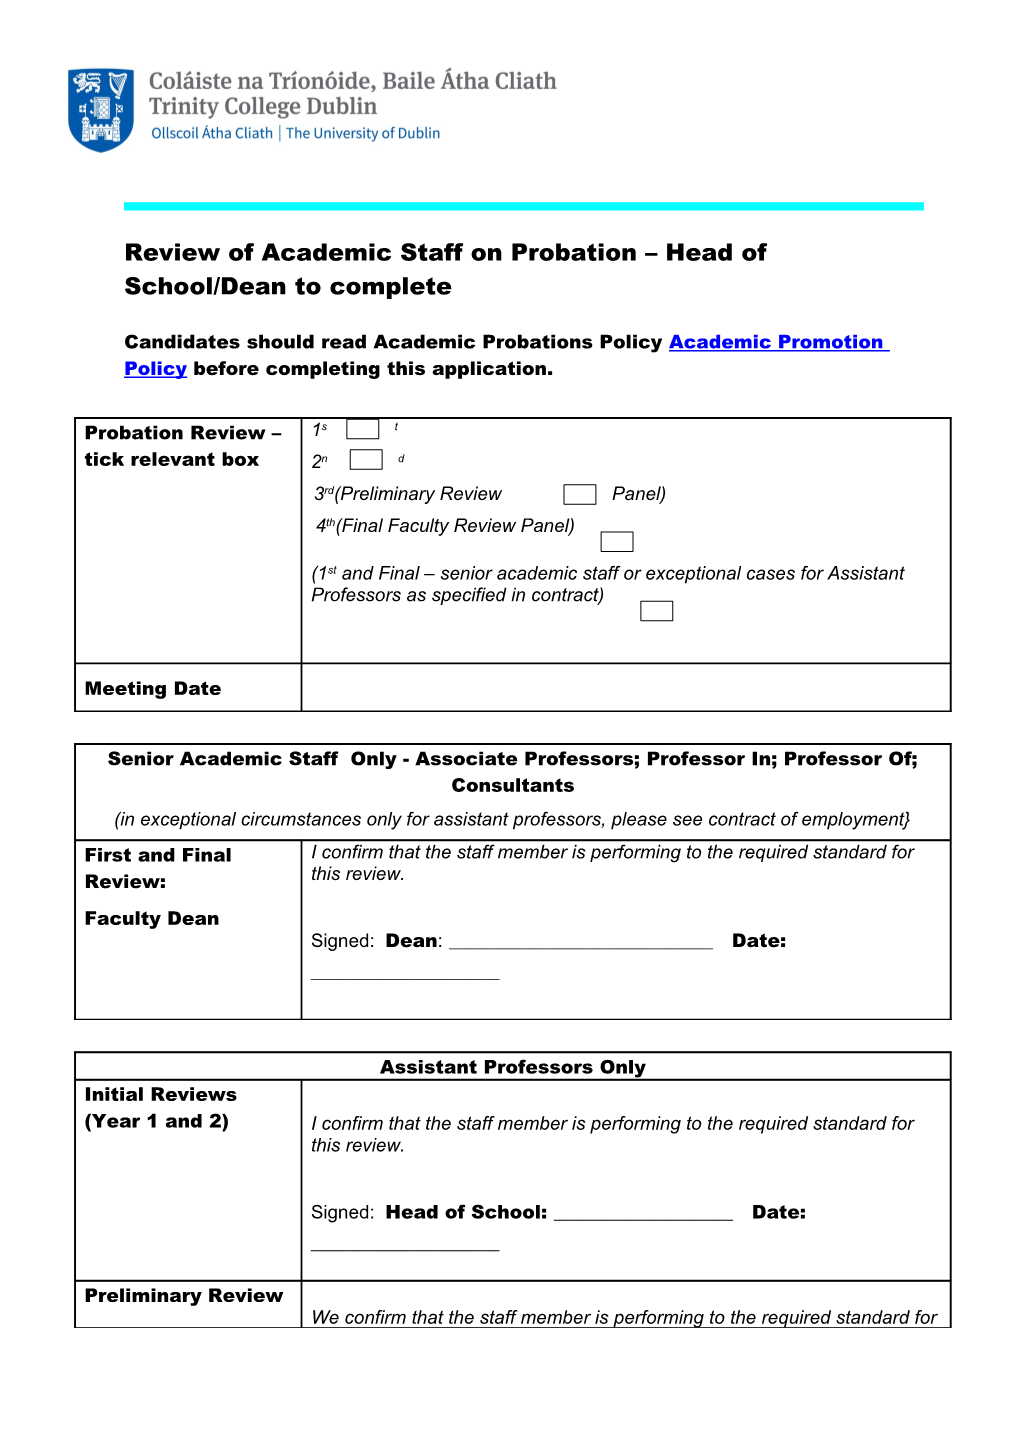 Candidates Should Read Academic Probations Policy Academic Promotion Policy Before Completing